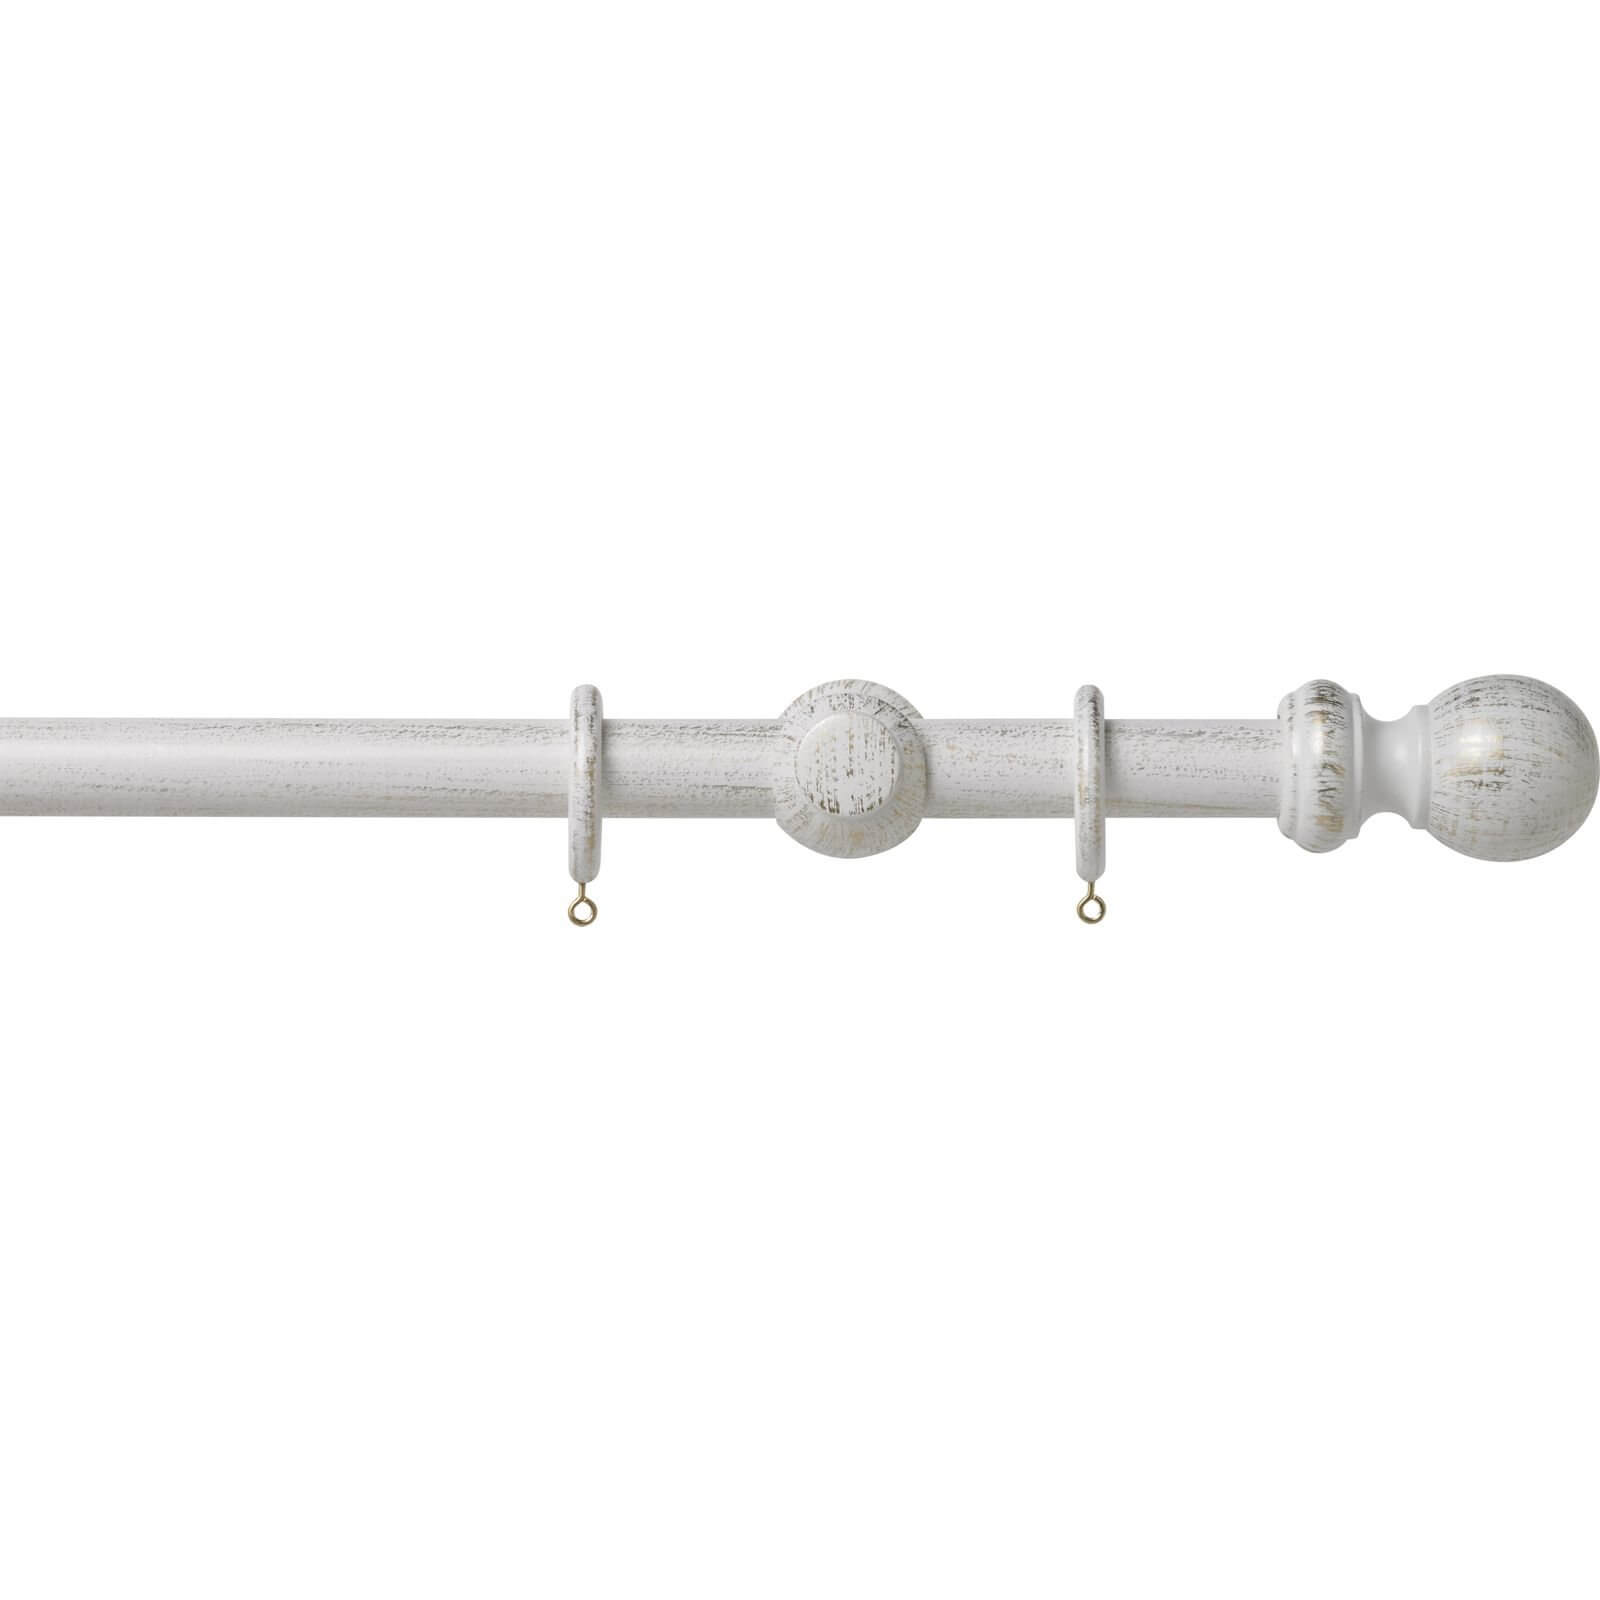 Photo of Scratched White Wood 28mm Curtain Pole With Ball Finials - 2.4m